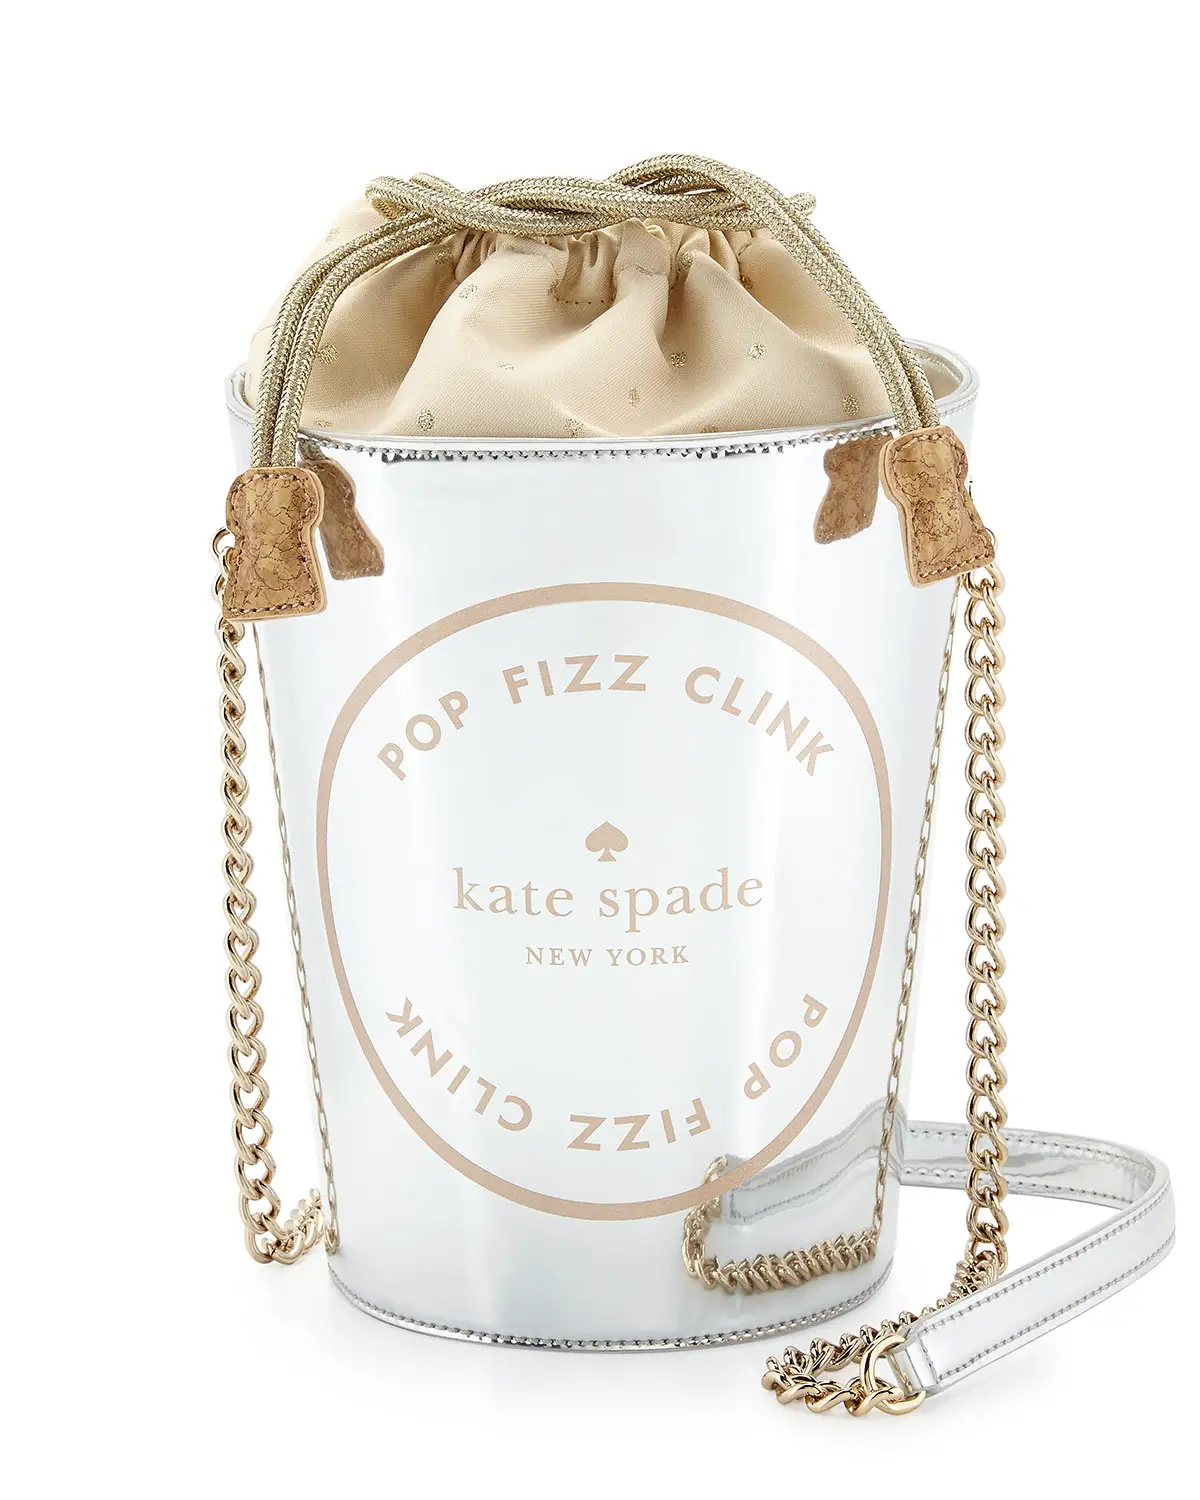 kate spade new york place your bets champagne bucket bag, silver